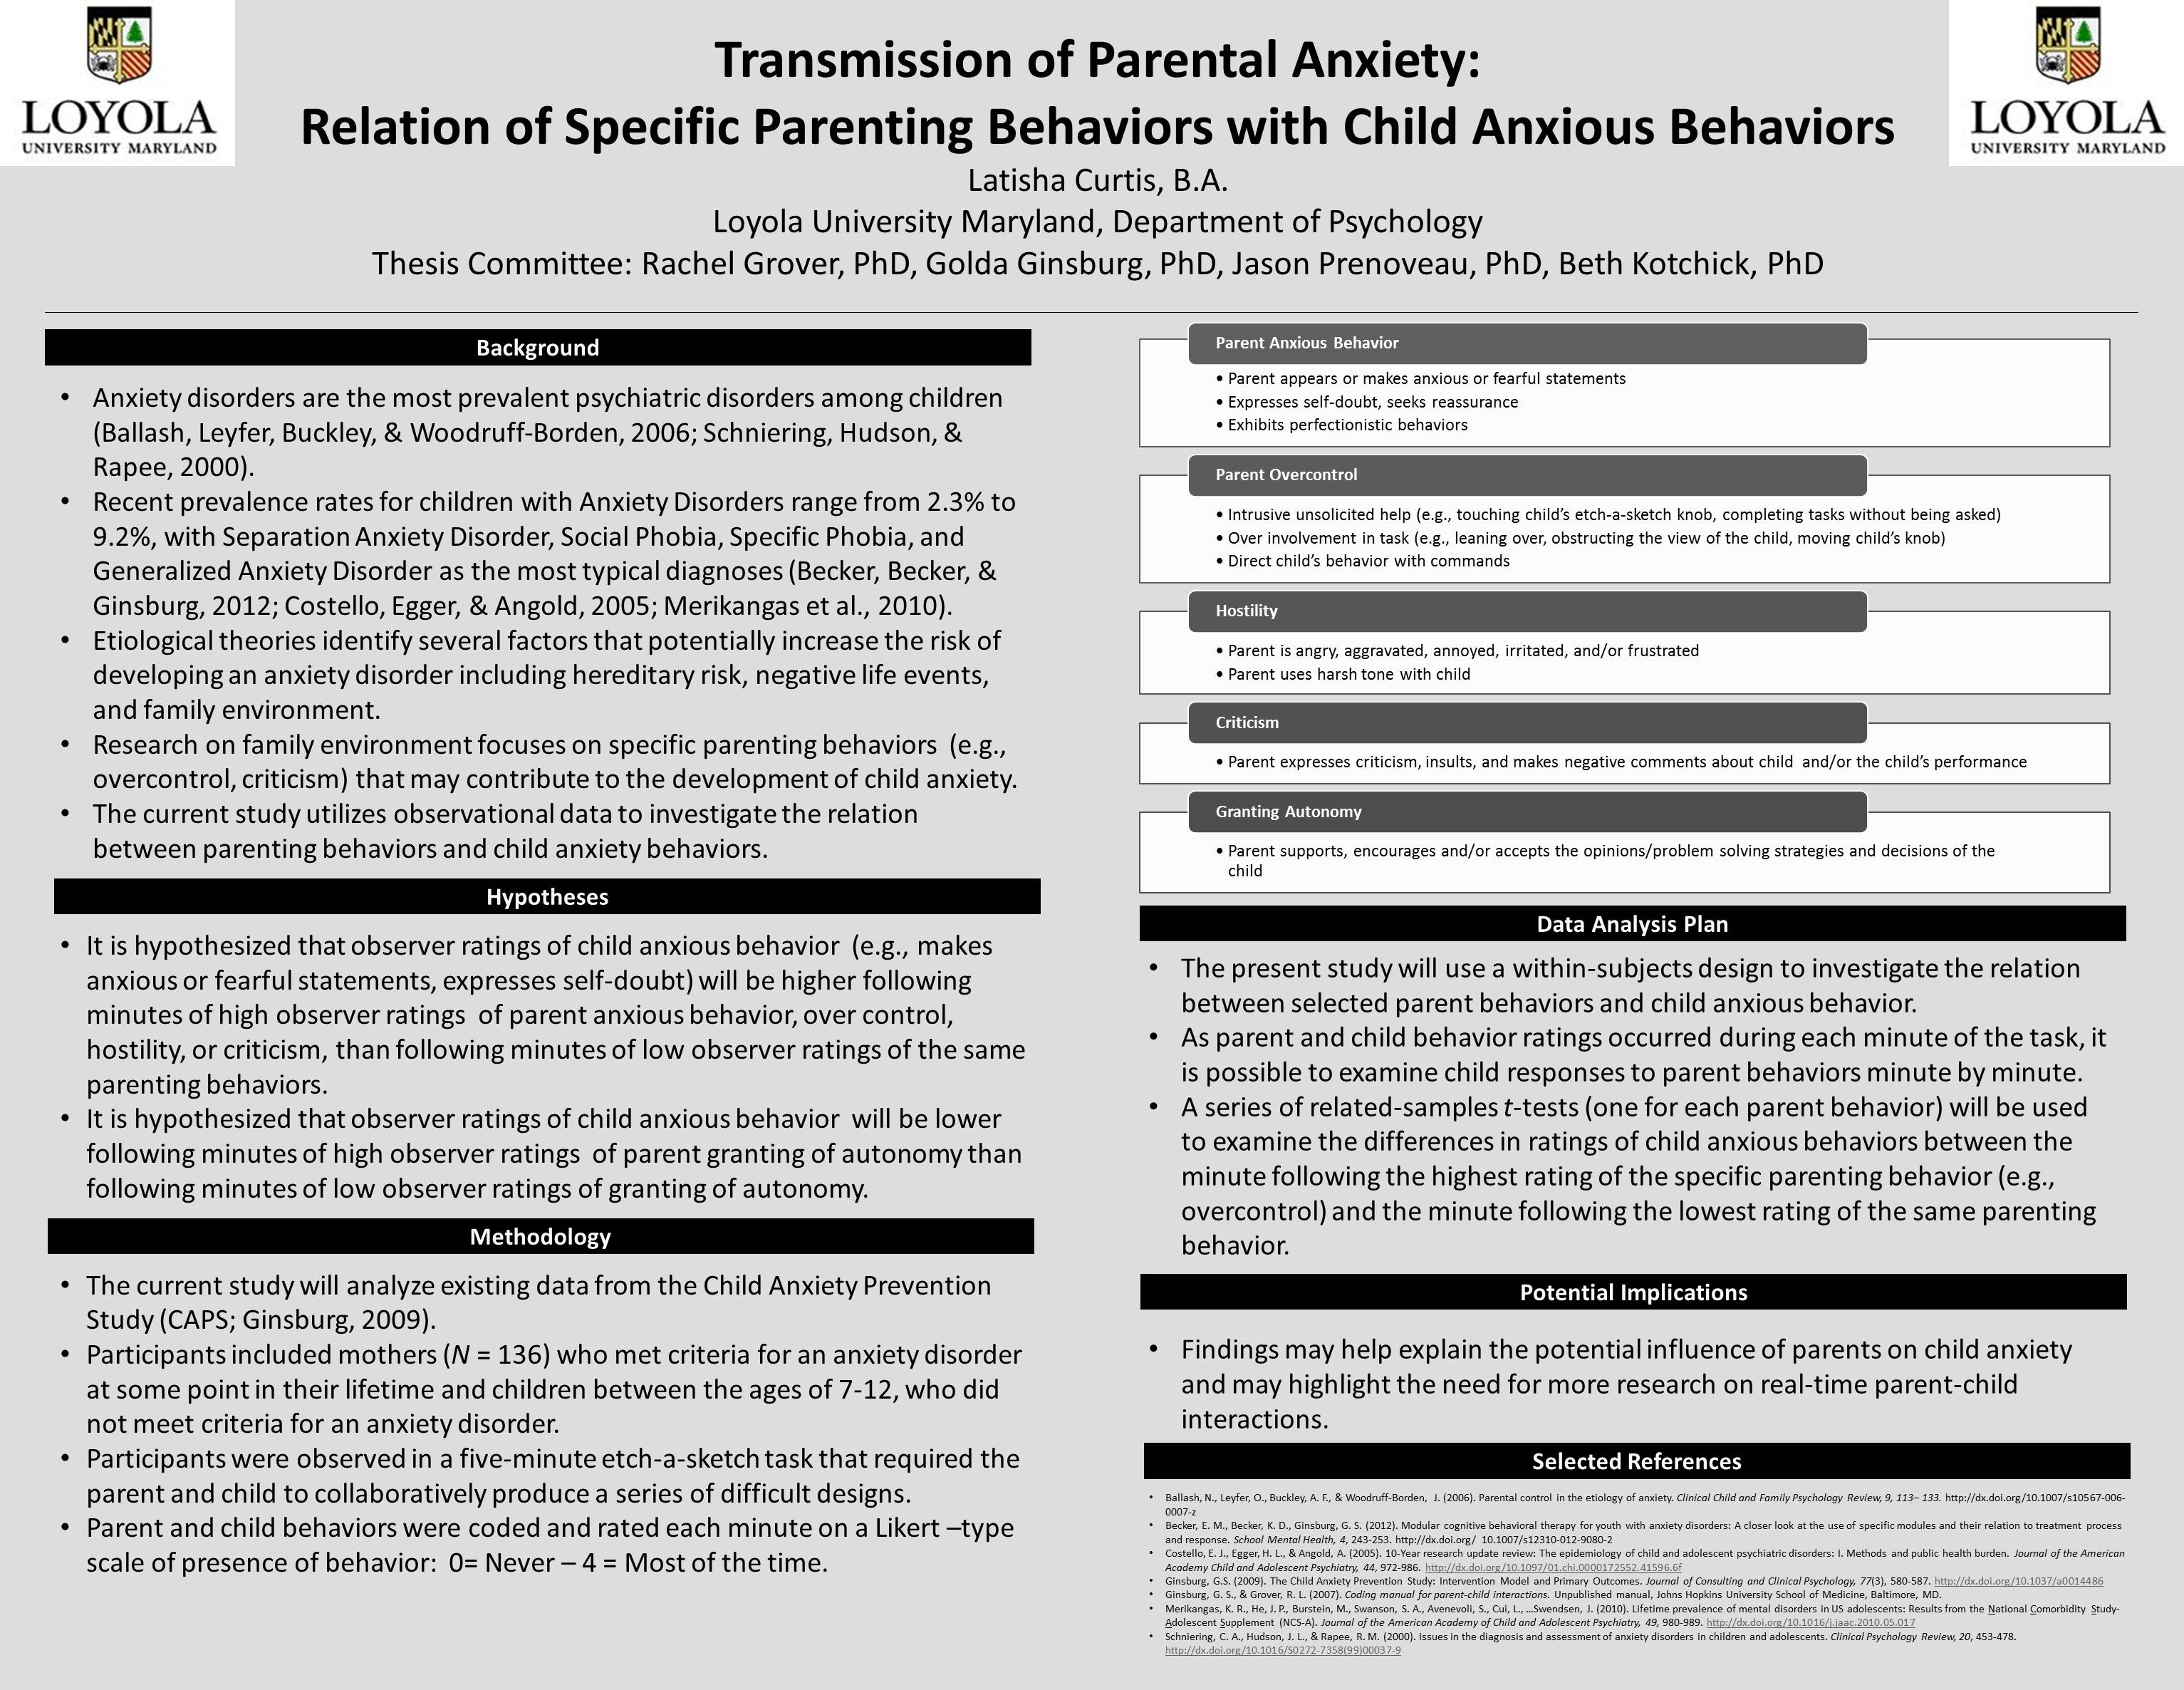 poster image: 'Examining the Relation Between Anxious Parental Behaviors and Child Anxiety'